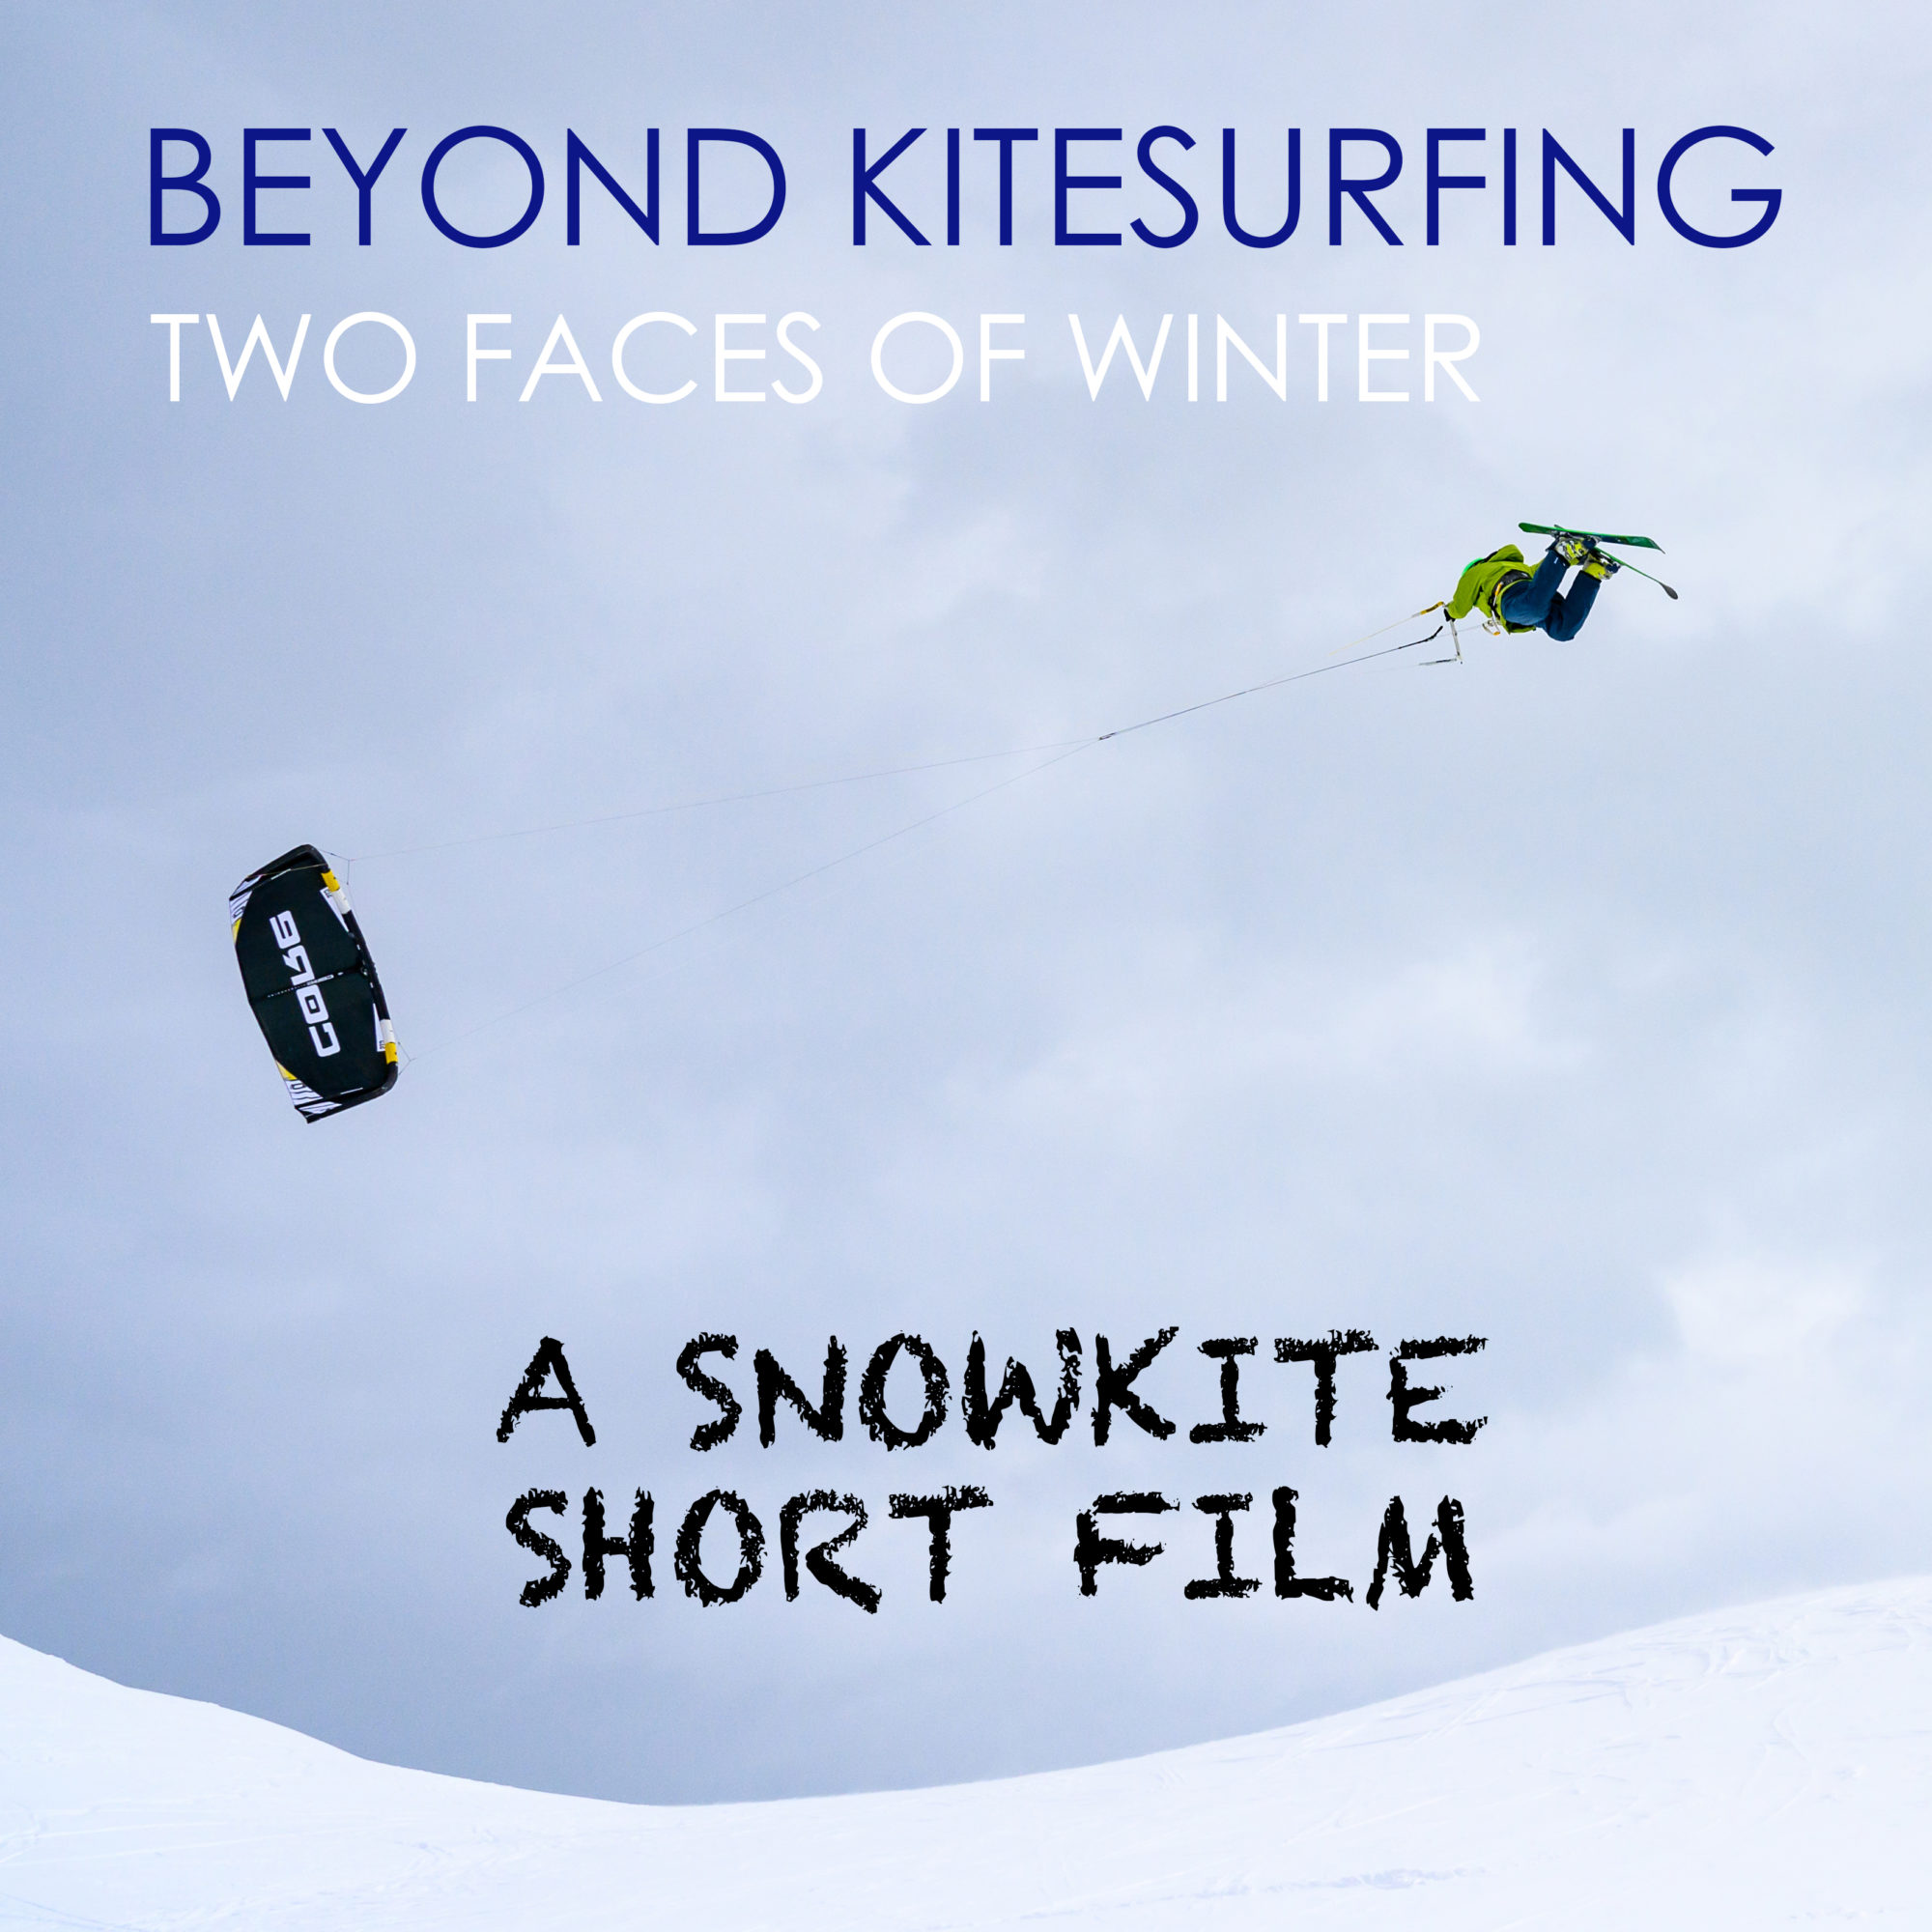 LukasPitsch LP6 3681 scaled - Beyond Kitesurfing - Two faces of winter